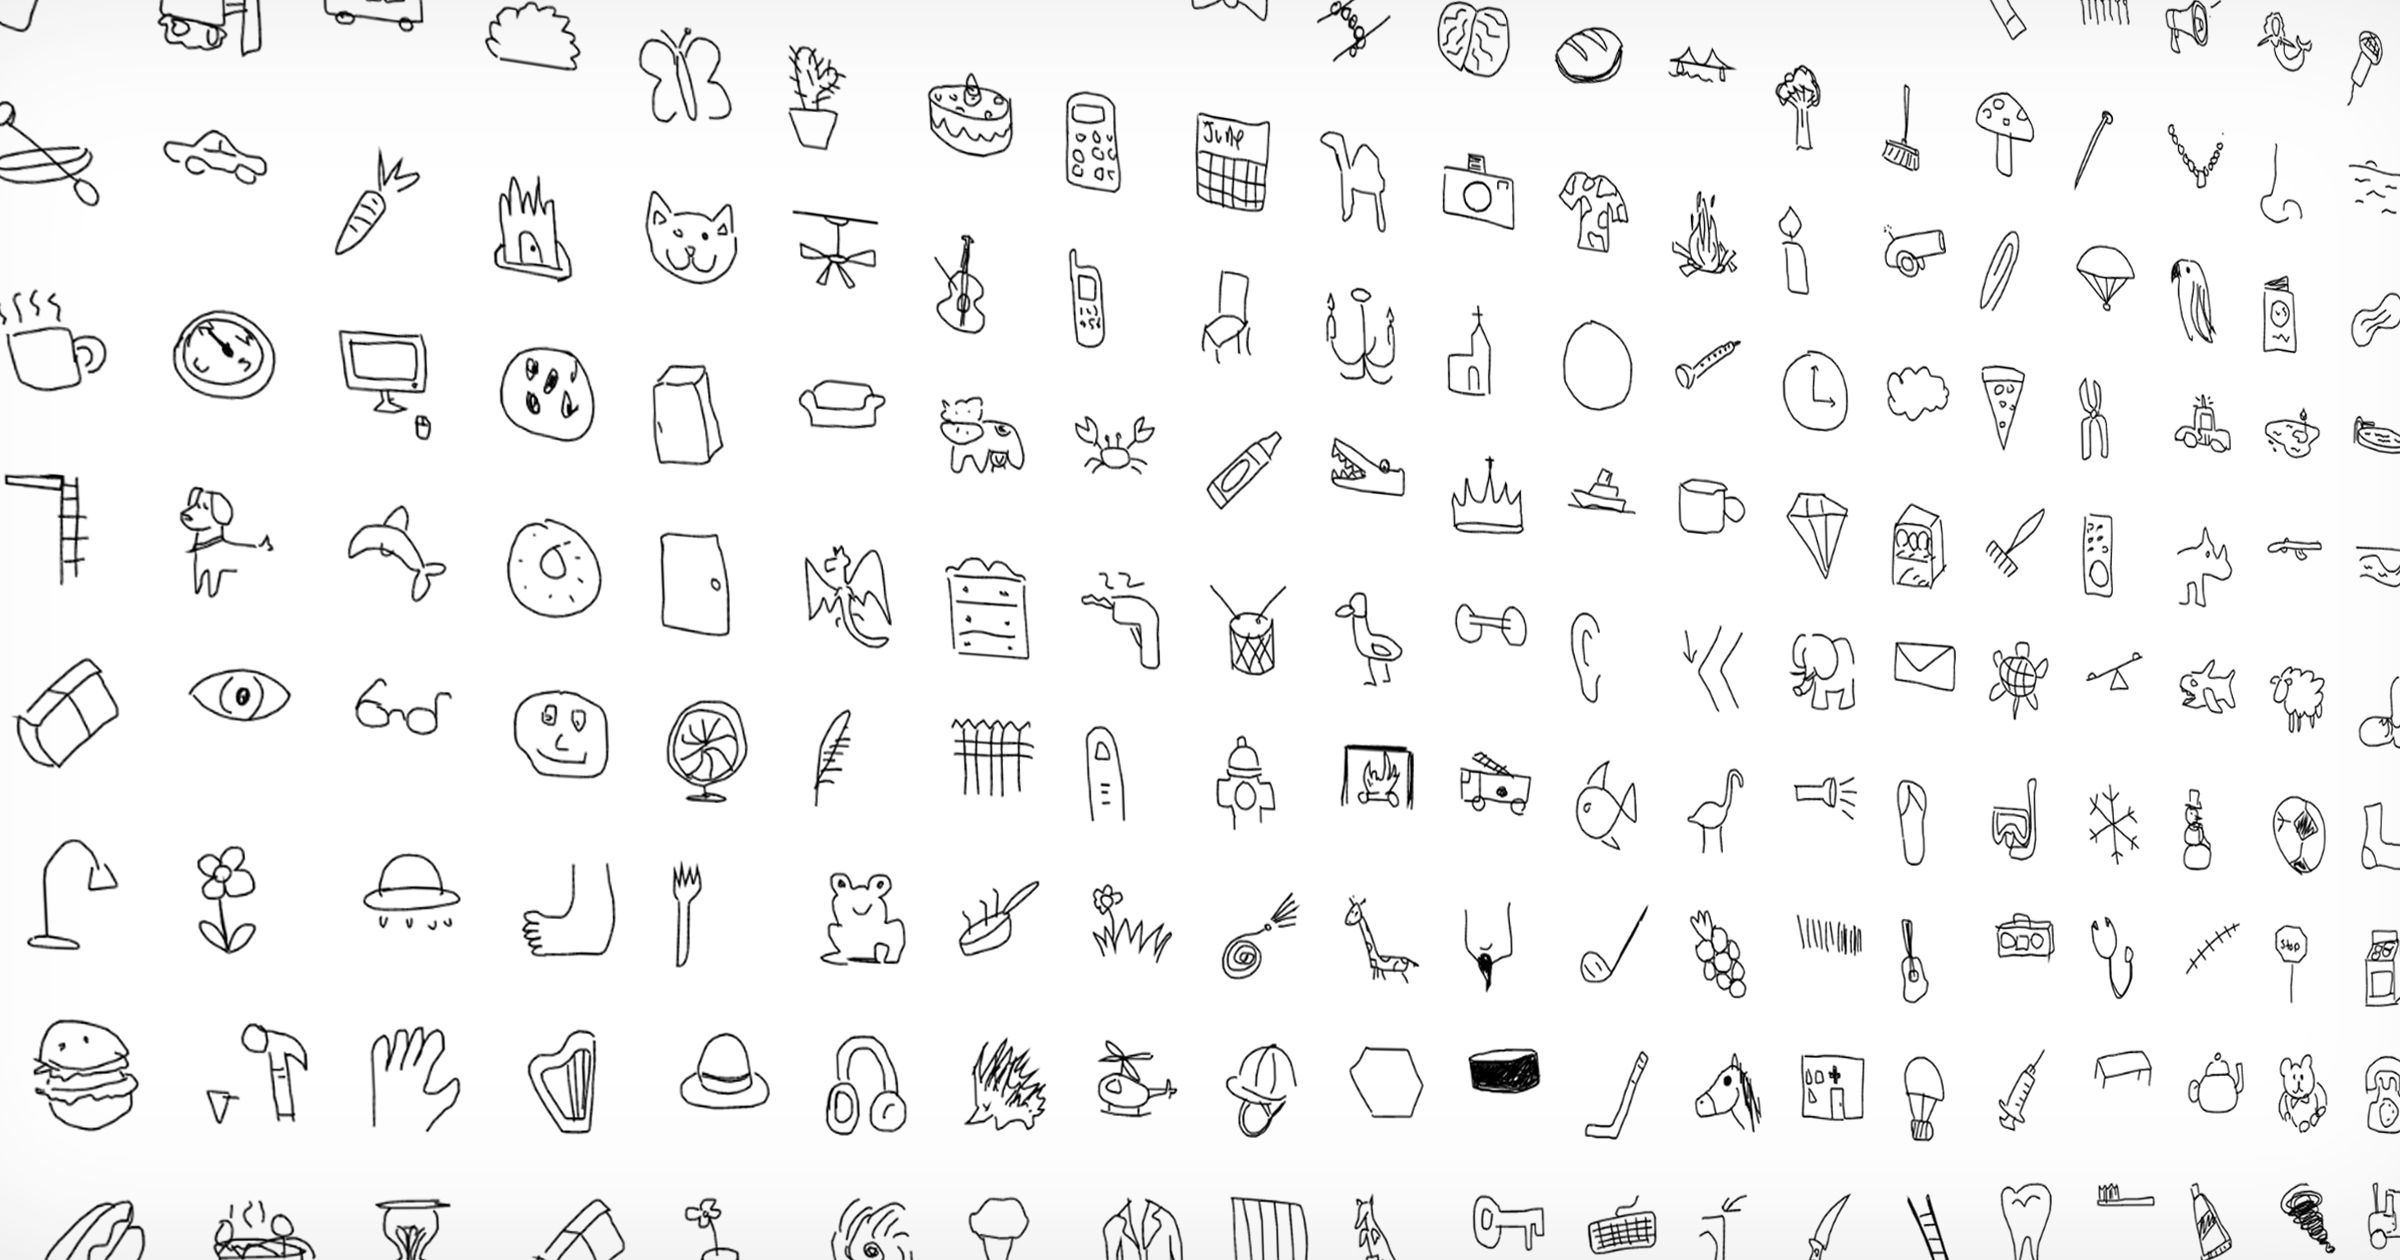 Some doodles from the Quick, Draw! dataset, which includes 50 million total sketches. 